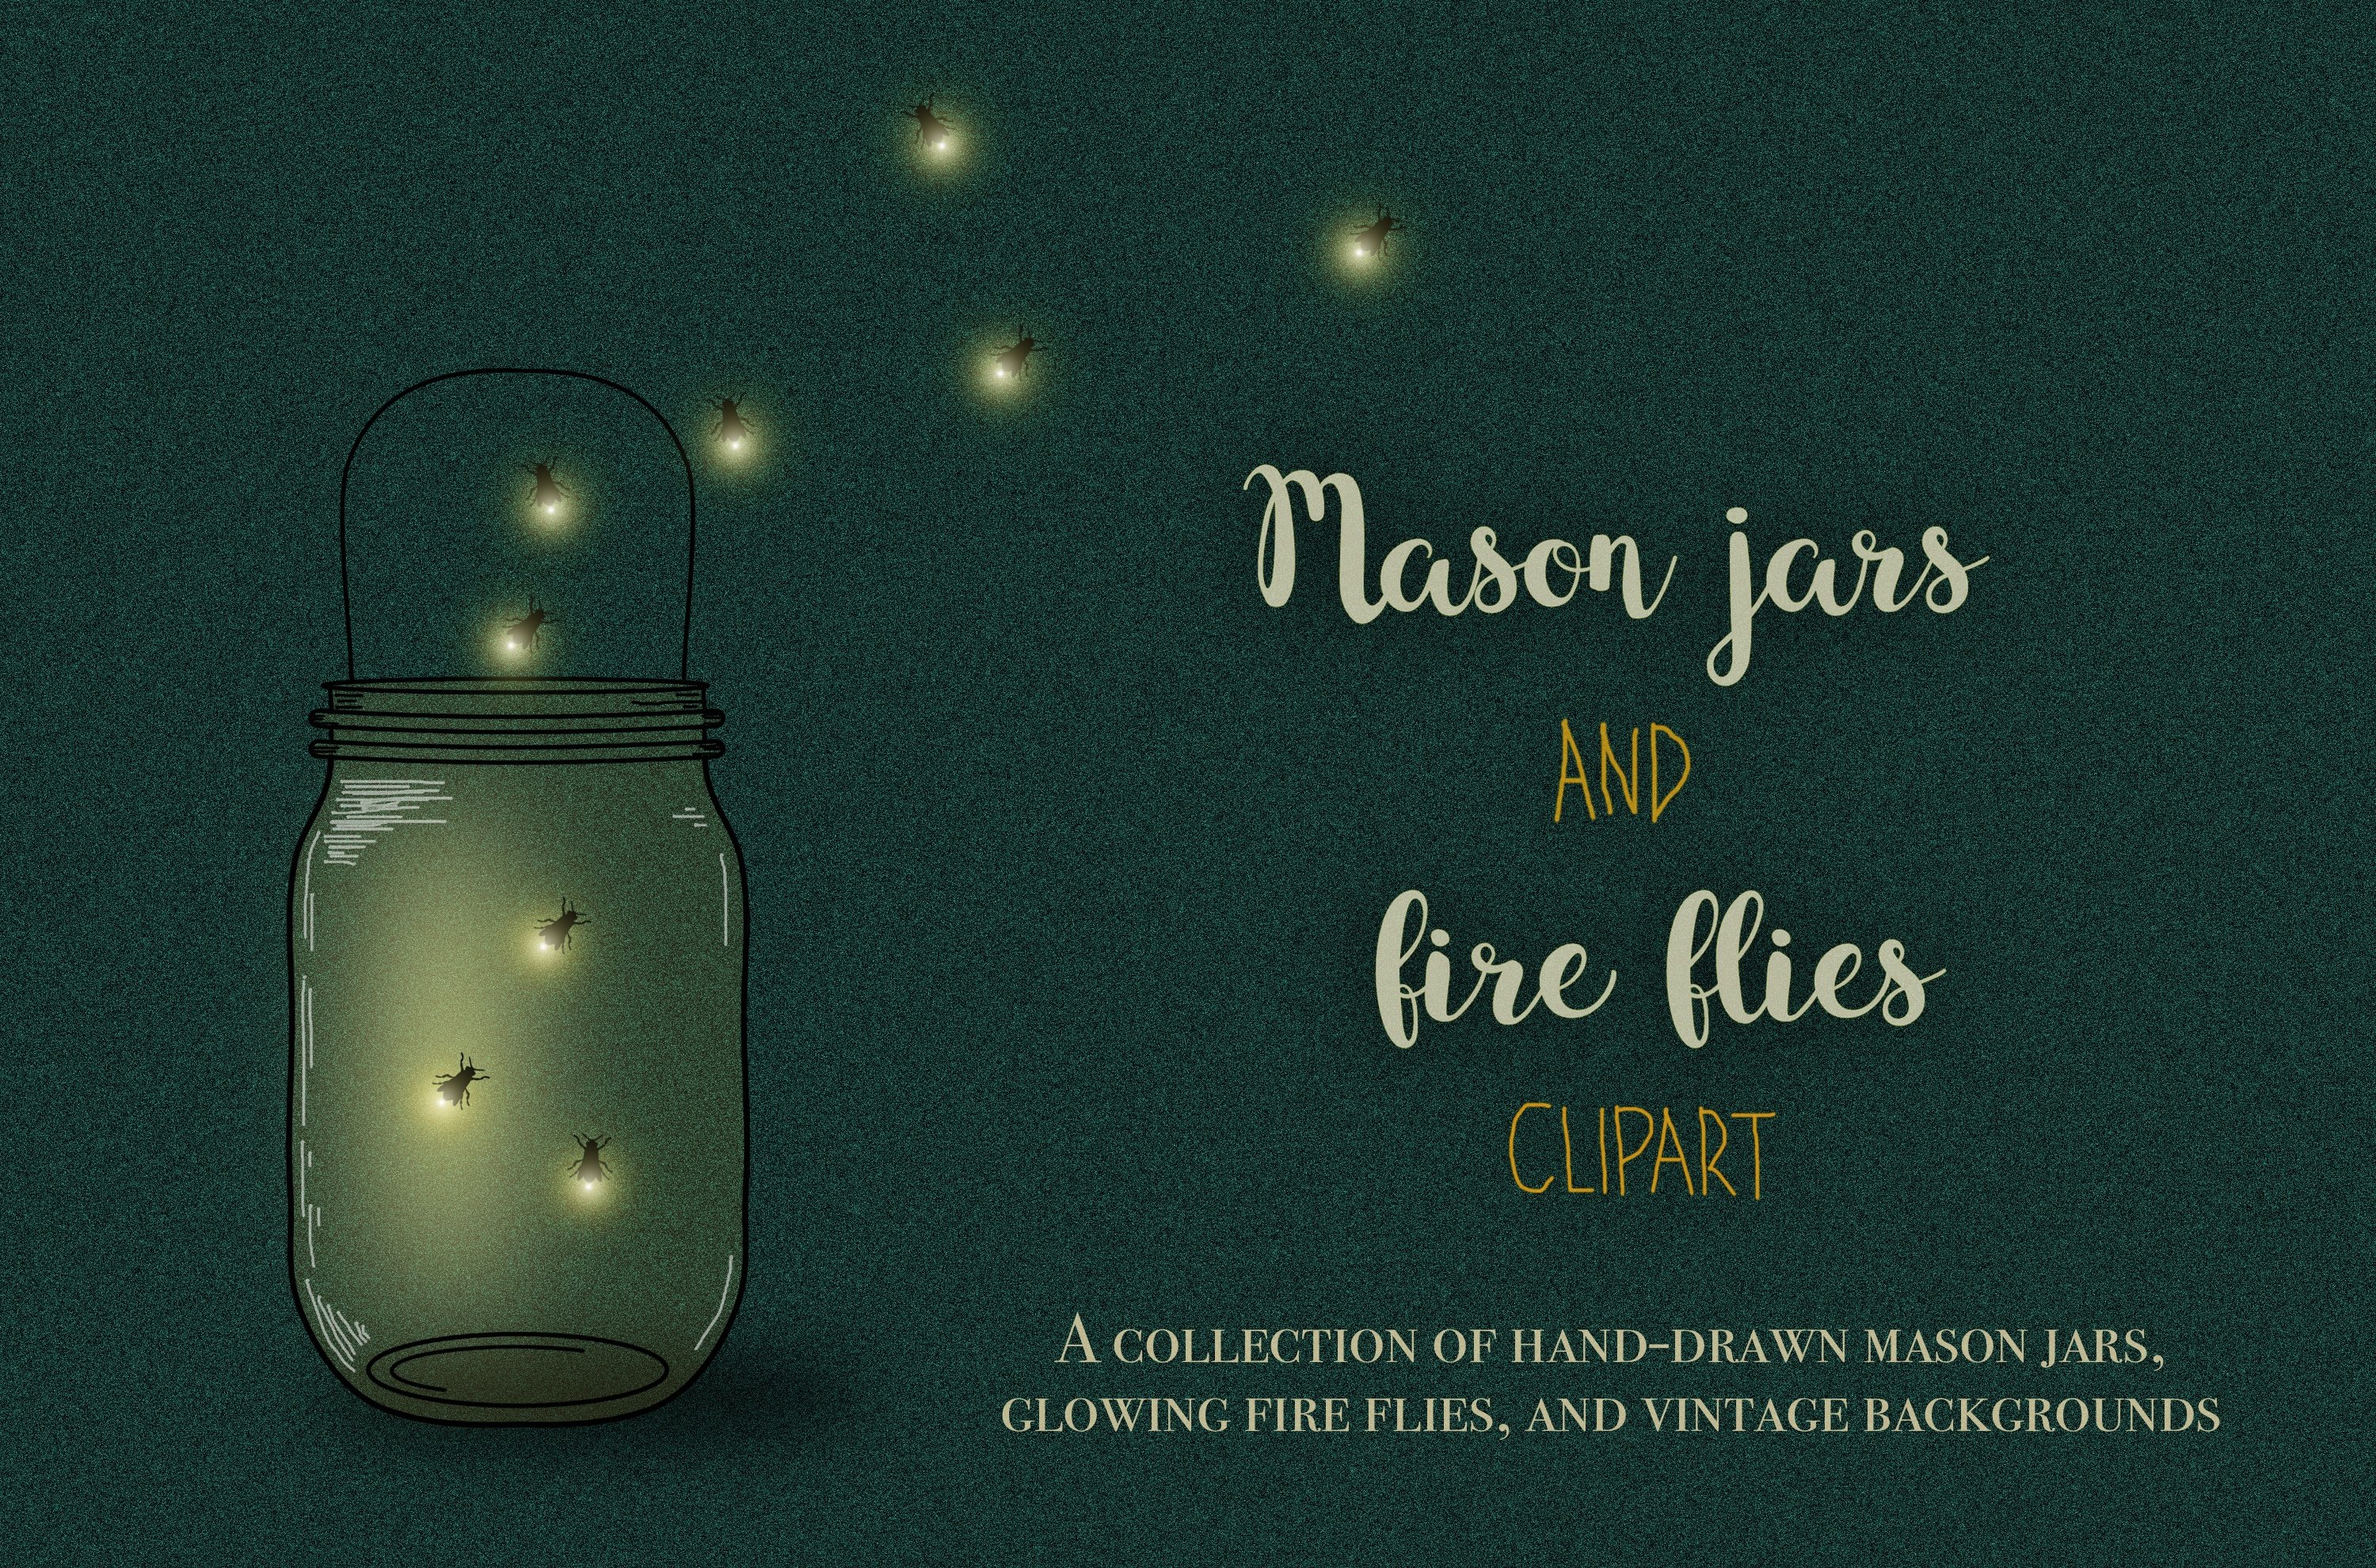 Mason jars and fireflies clipart cover image.